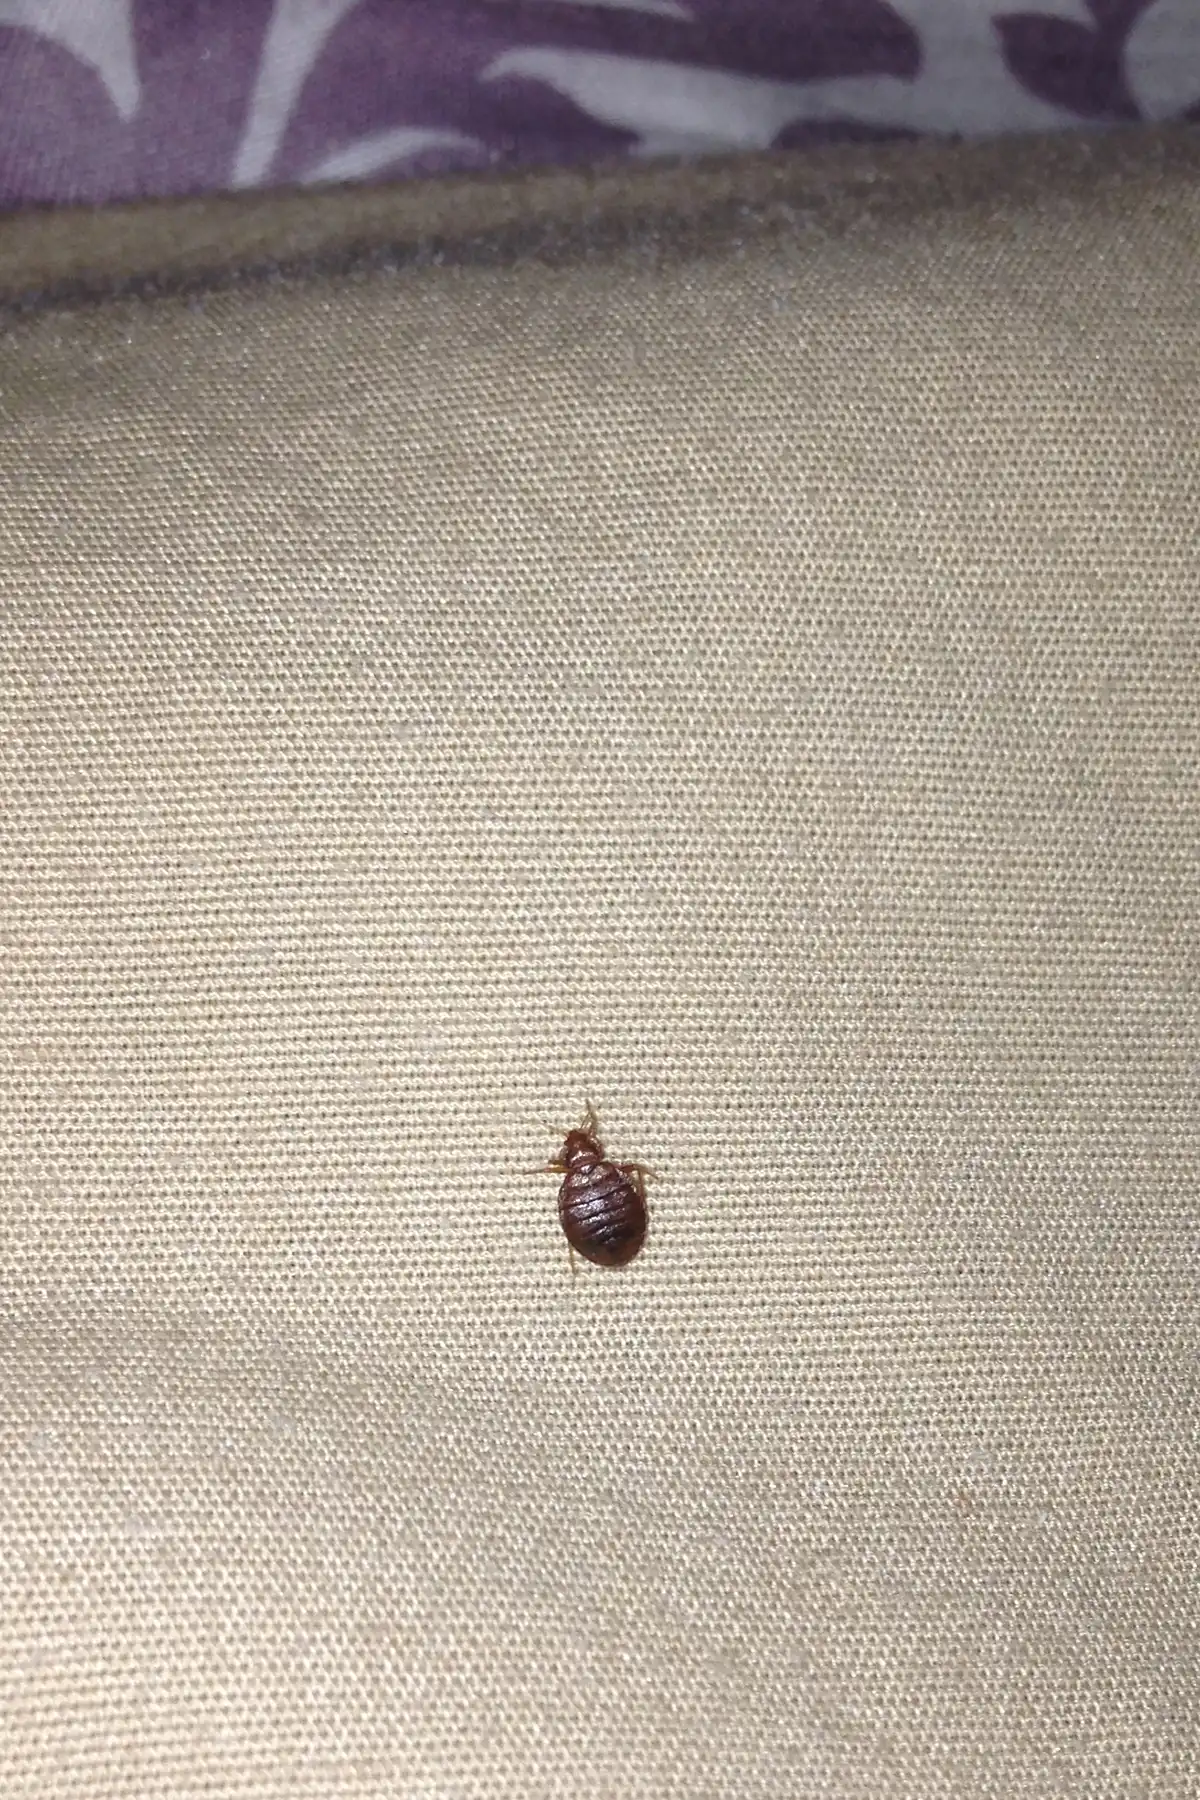 I brought a Bed Bug into my Crawled into Purse Work